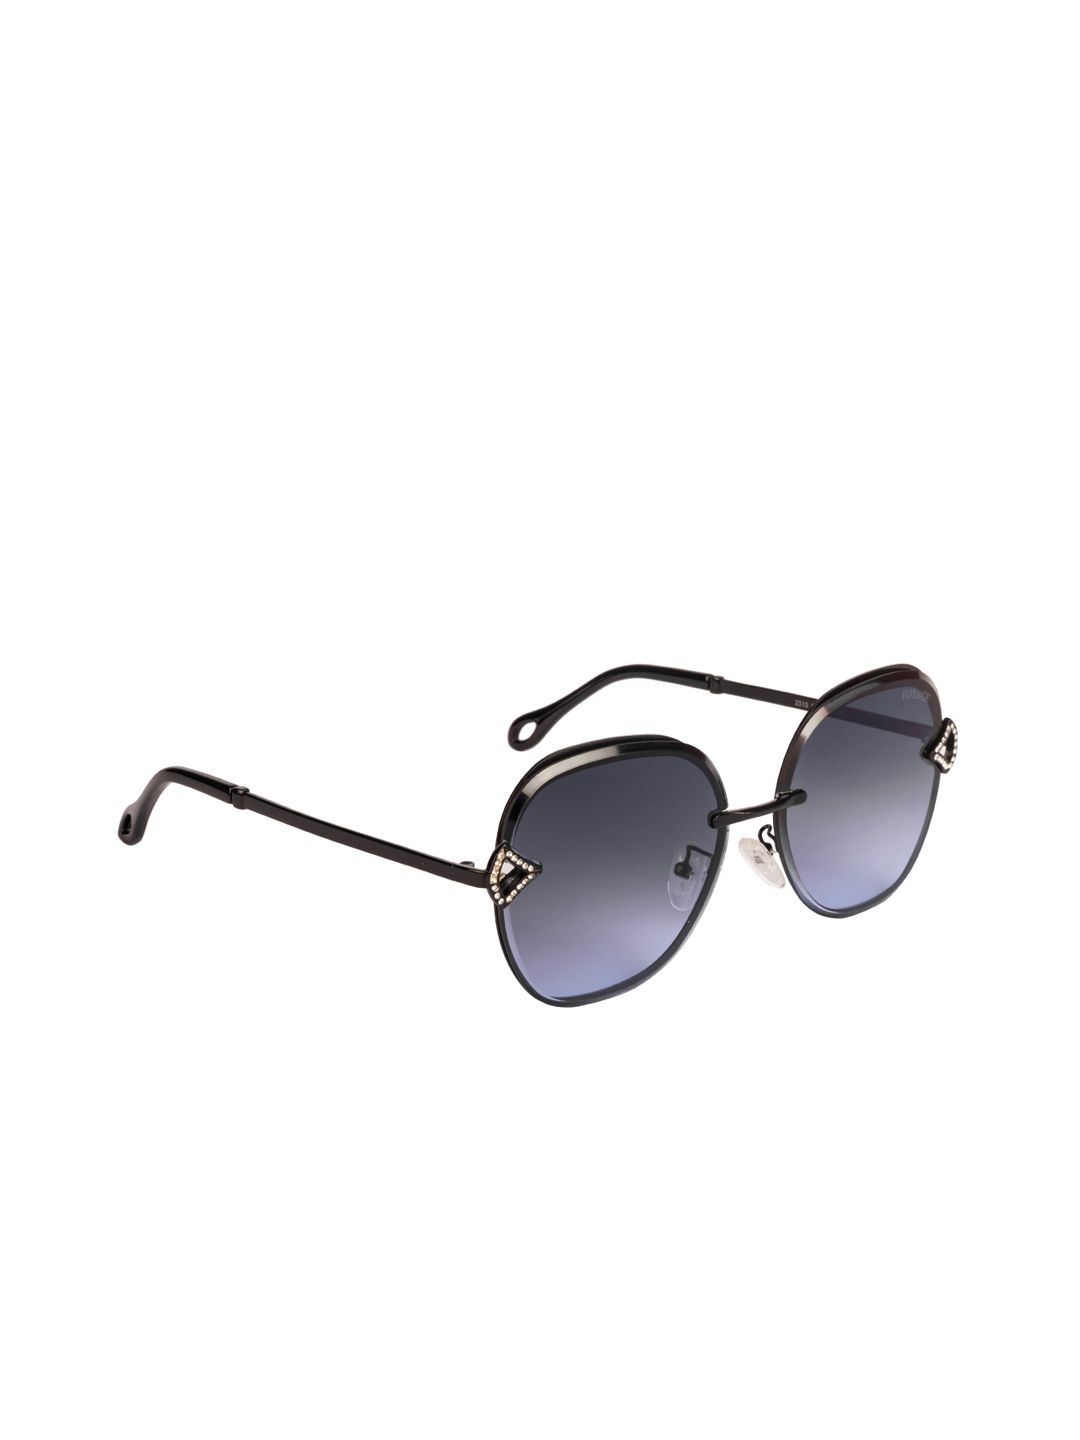 Voyage Women Oval Sunglasses 2519MG3054 Price in India